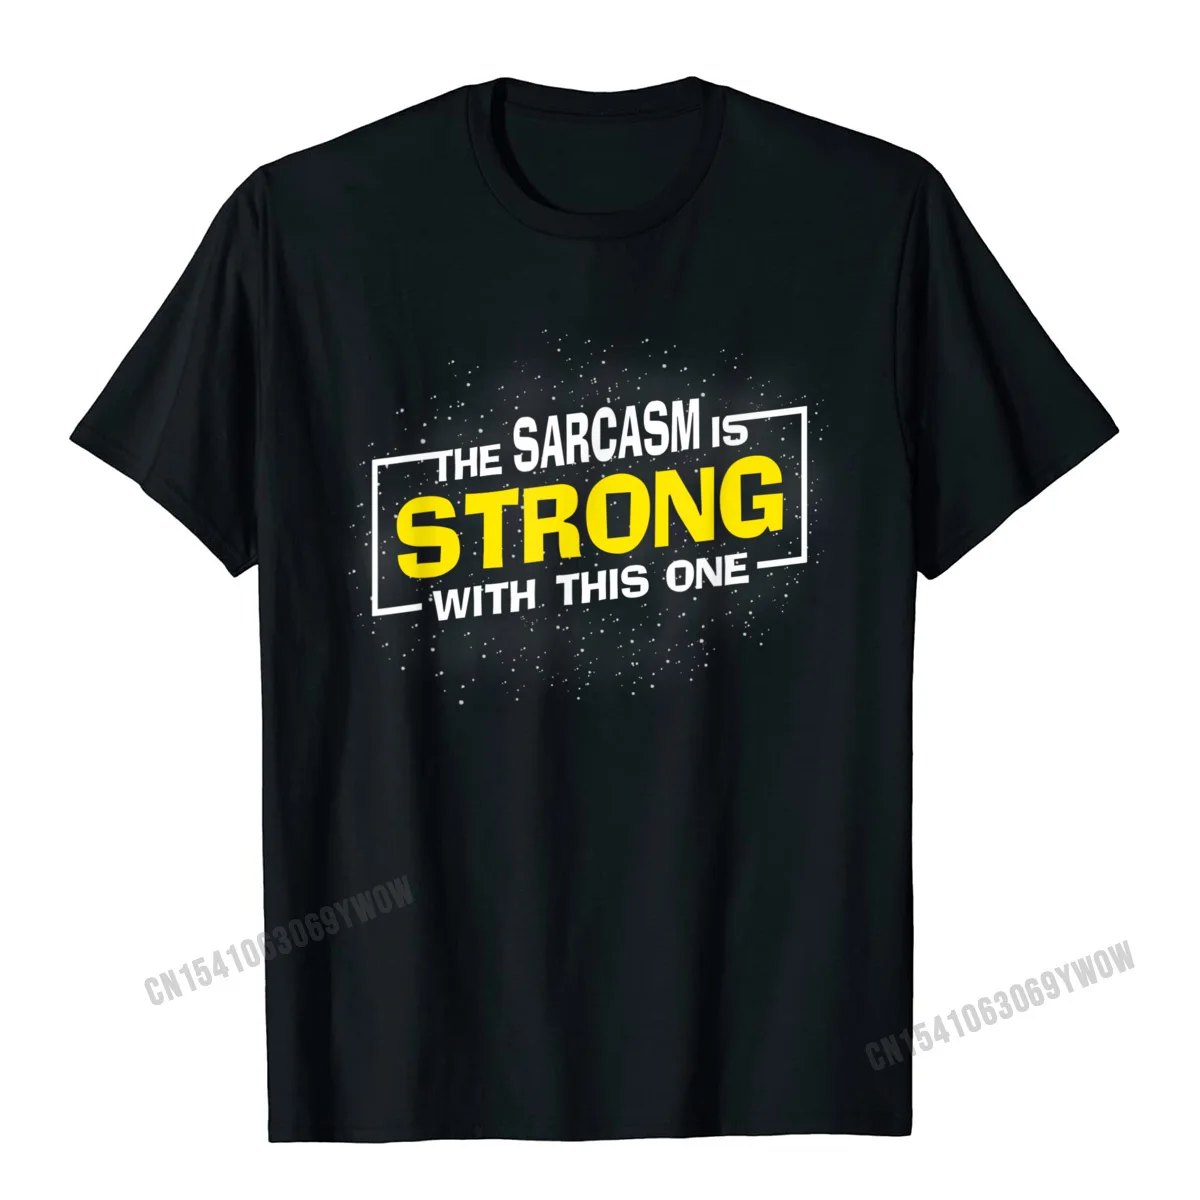 

The Sarcasm Is Strong With This One Sarcastic Sayings Gift T-Shirt Camisas Men Cotton Men Tops Shirt Casual T Shirt Funny Fitted